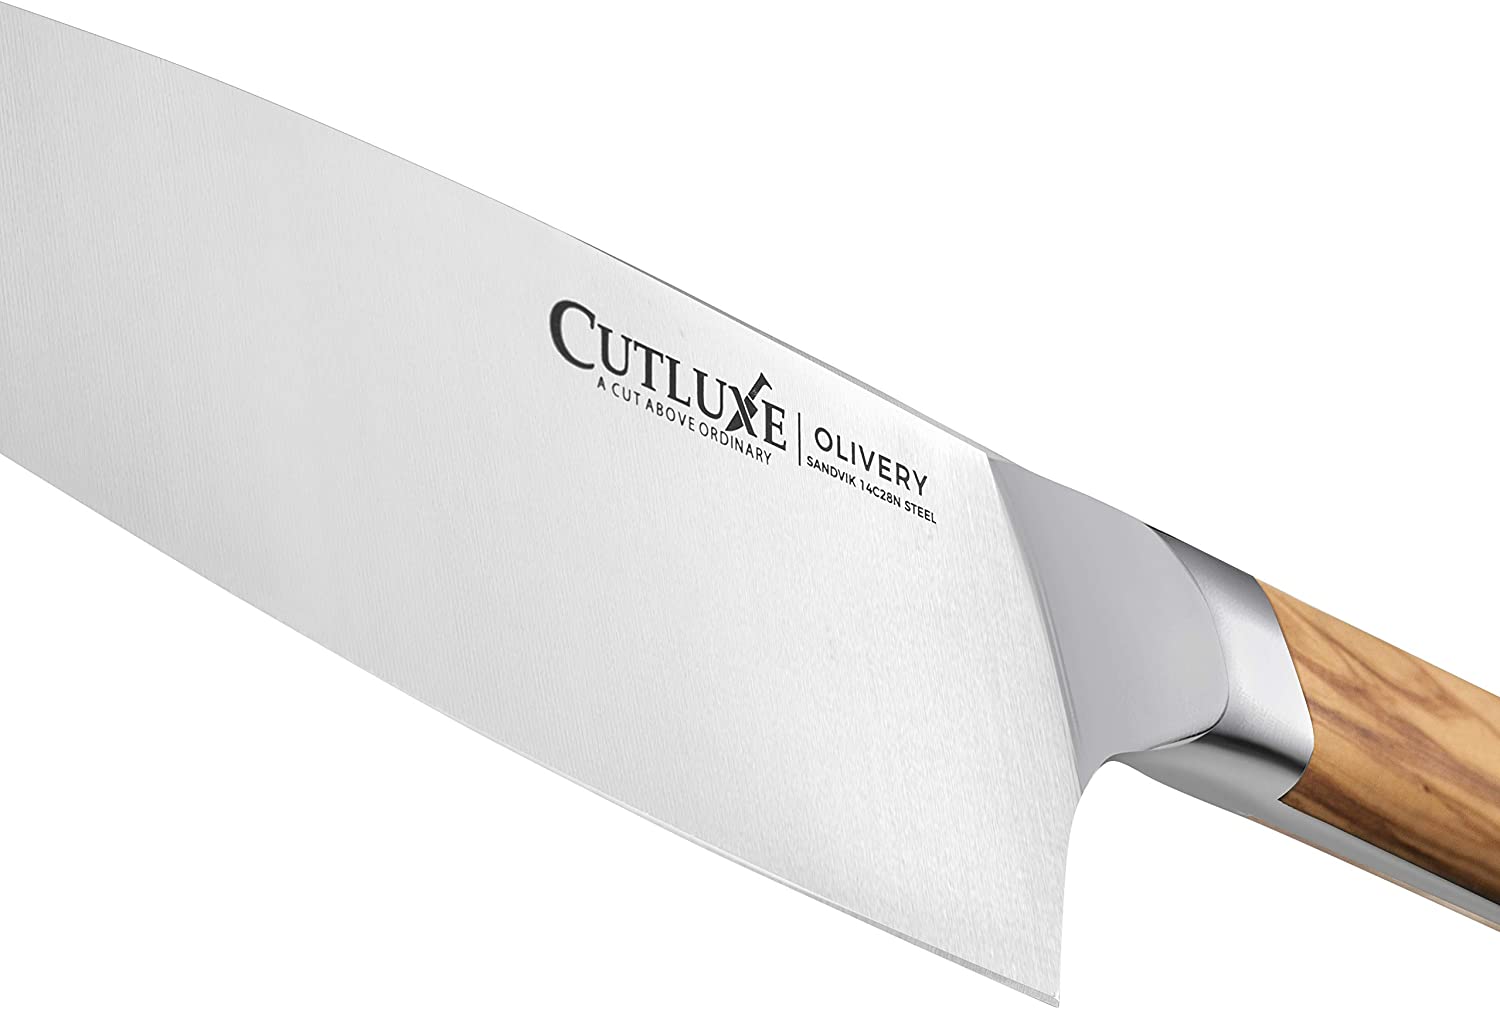 Chef's Knife, High Carbon Stainless Steel (8-Inch) – Orblue